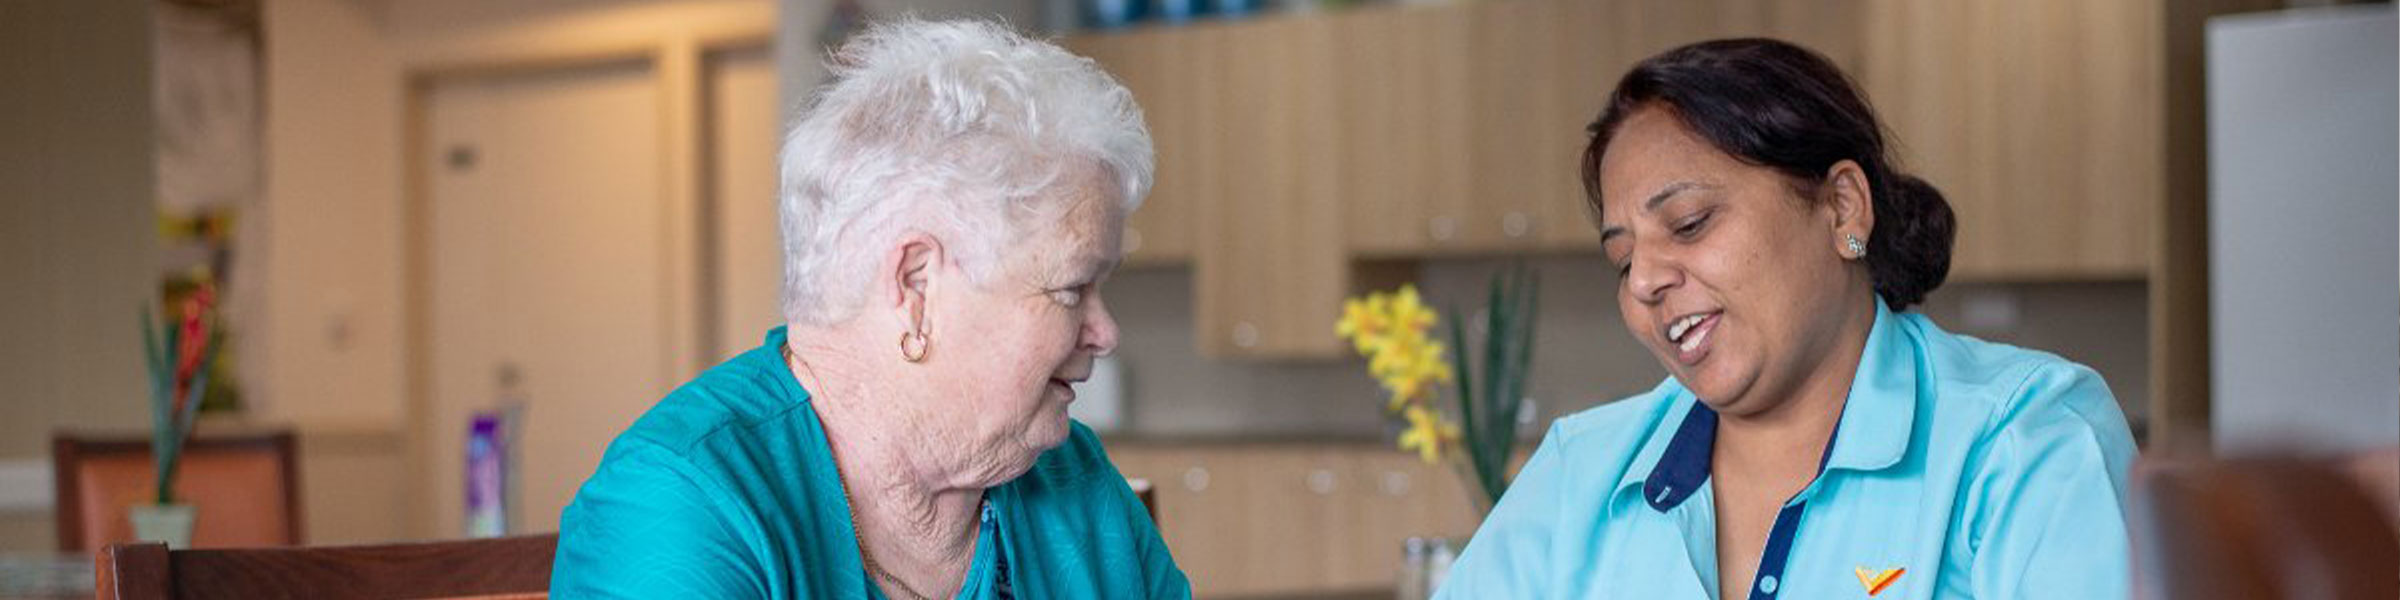 Vacenti Aged Care Fees and Charges Explained